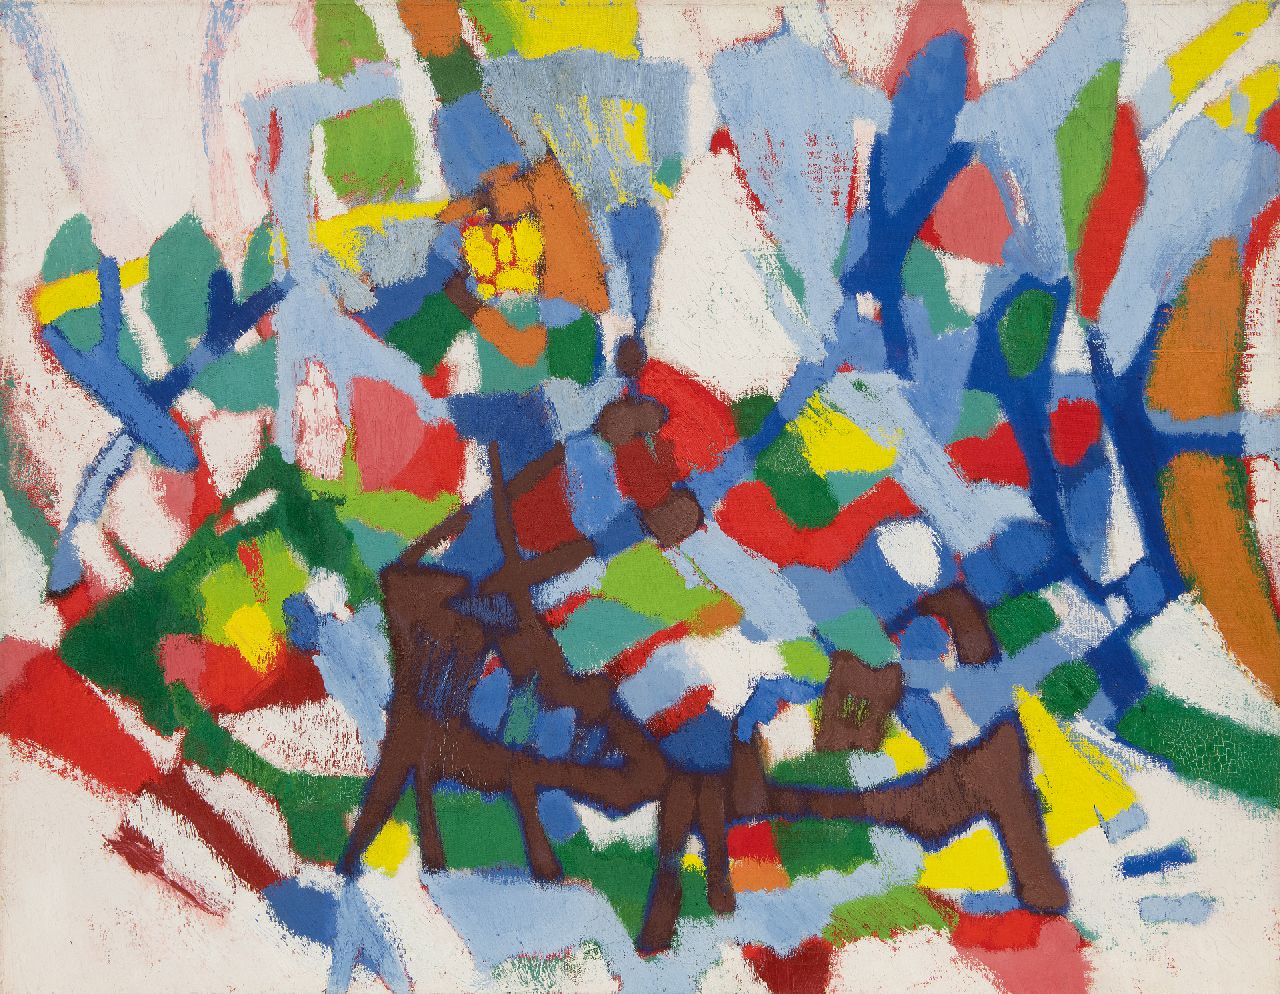 Hunziker F.  | Frieda Hunziker, Composition, oil on canvas 70.0 x 90.4 cm, signed on the reverse and painted in 1957